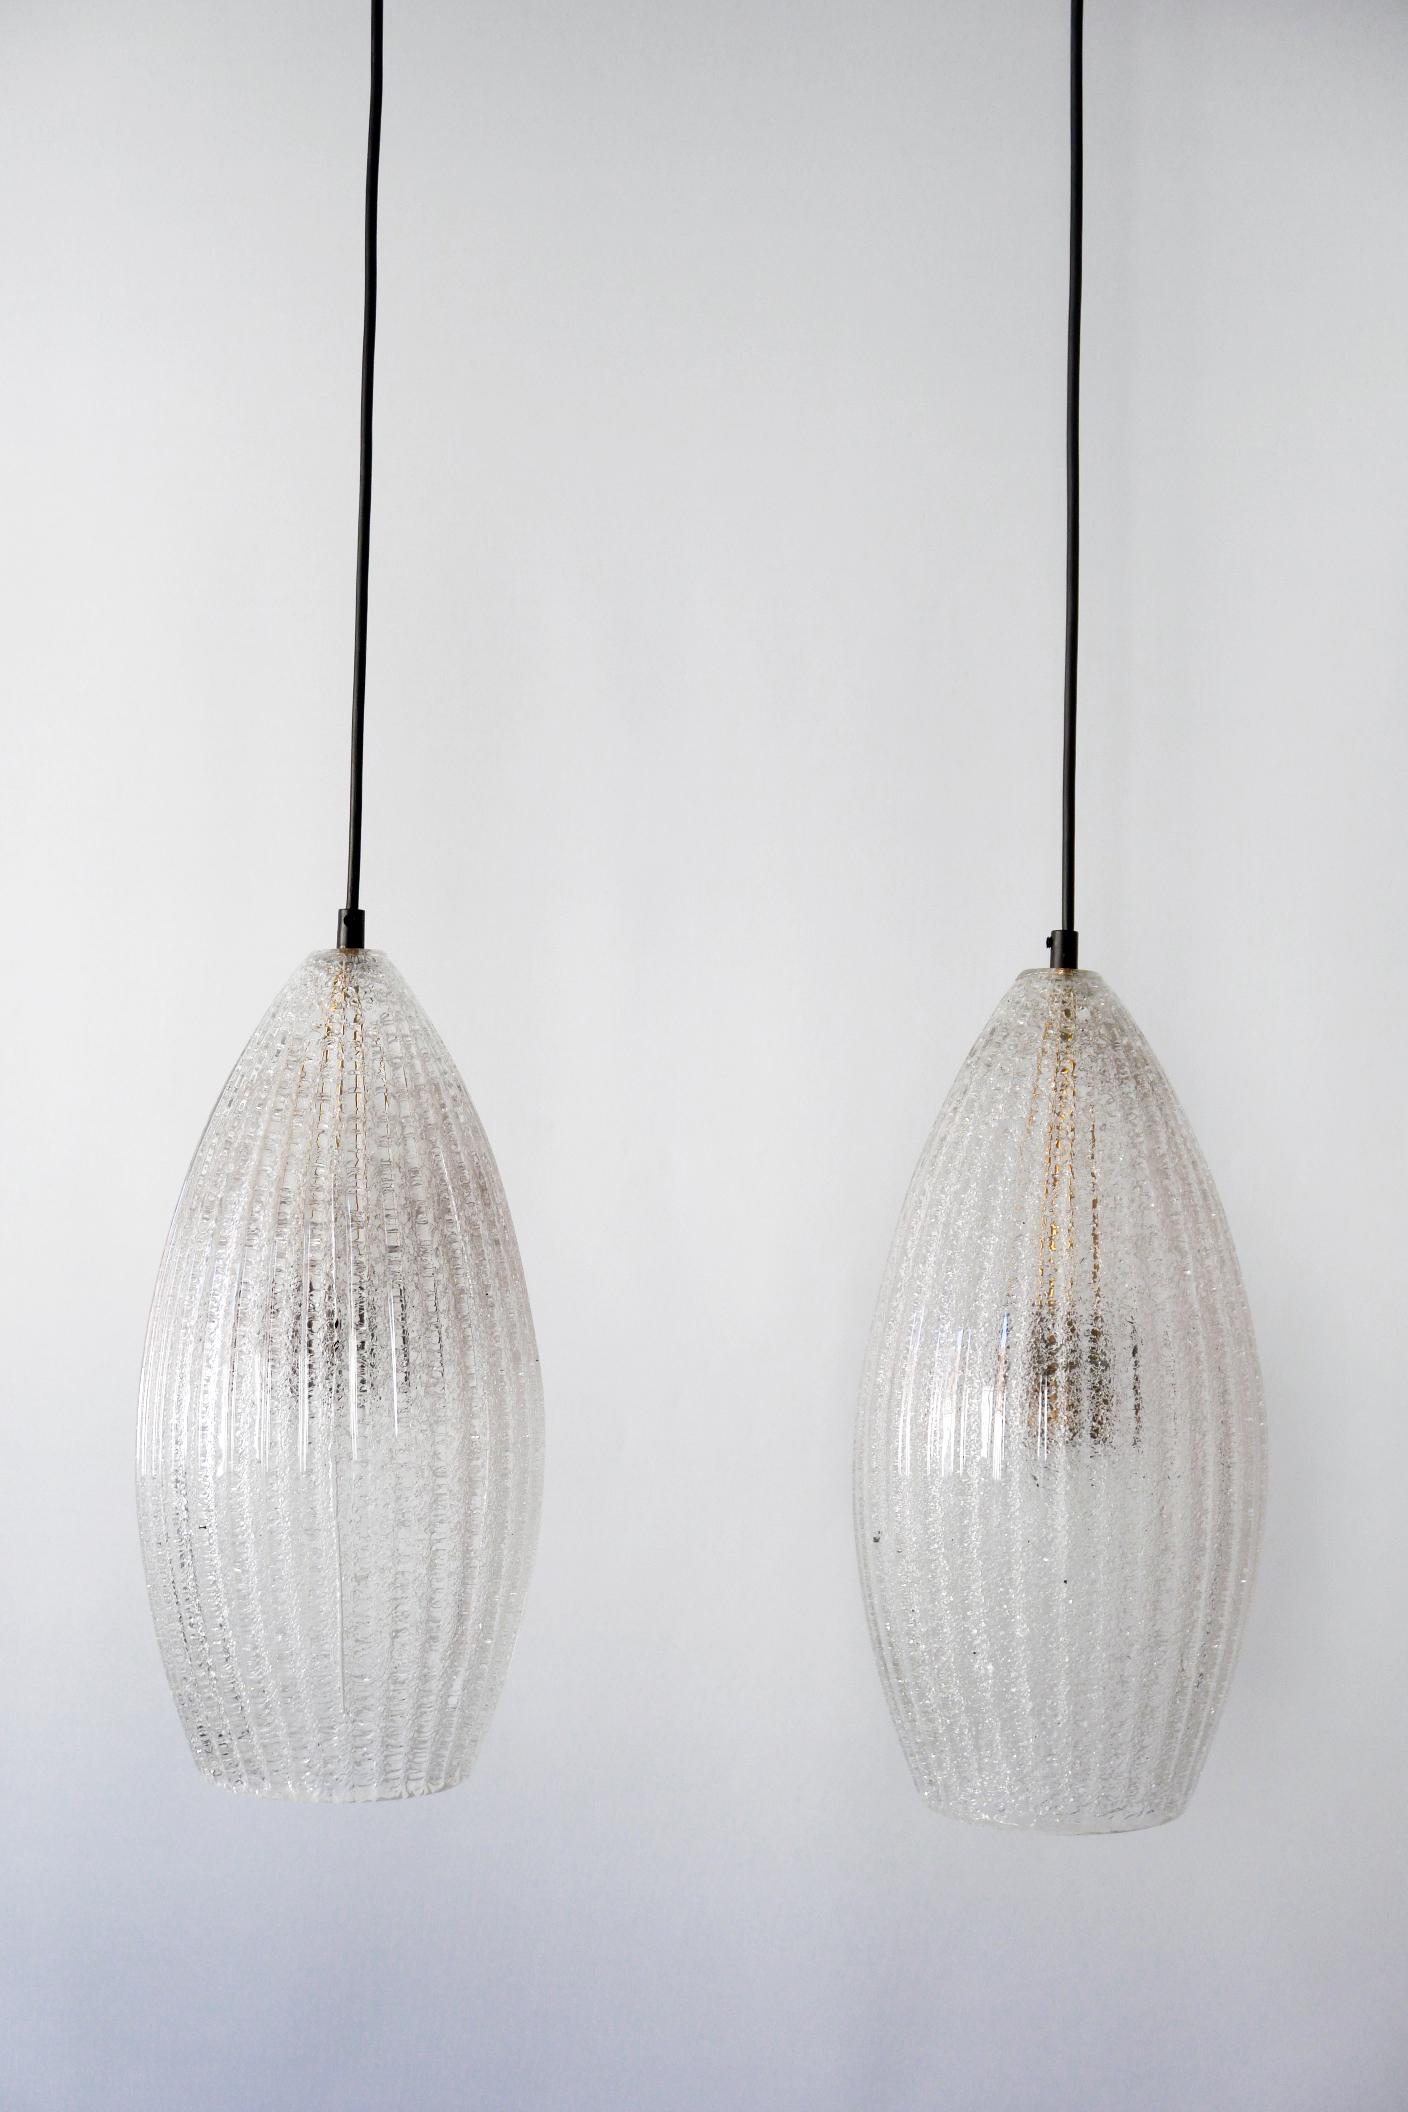 Set of Two Mid-Century Modern Textured Glass Pendant Lamps, 1960s, Germany For Sale 8